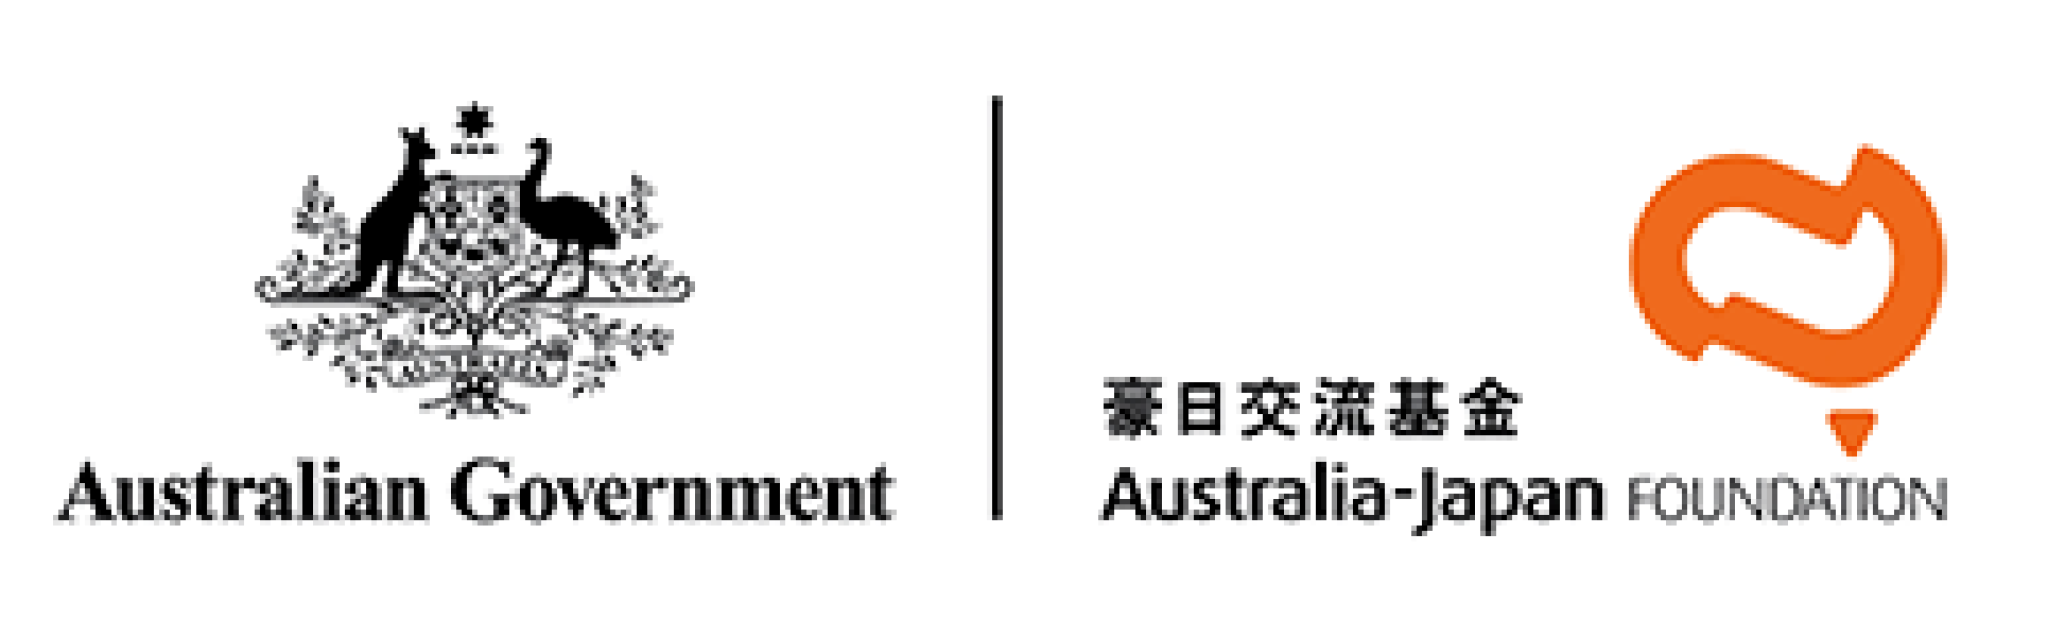 Australia-Japan Foundation of the Department of Foreign Affairs and Trade